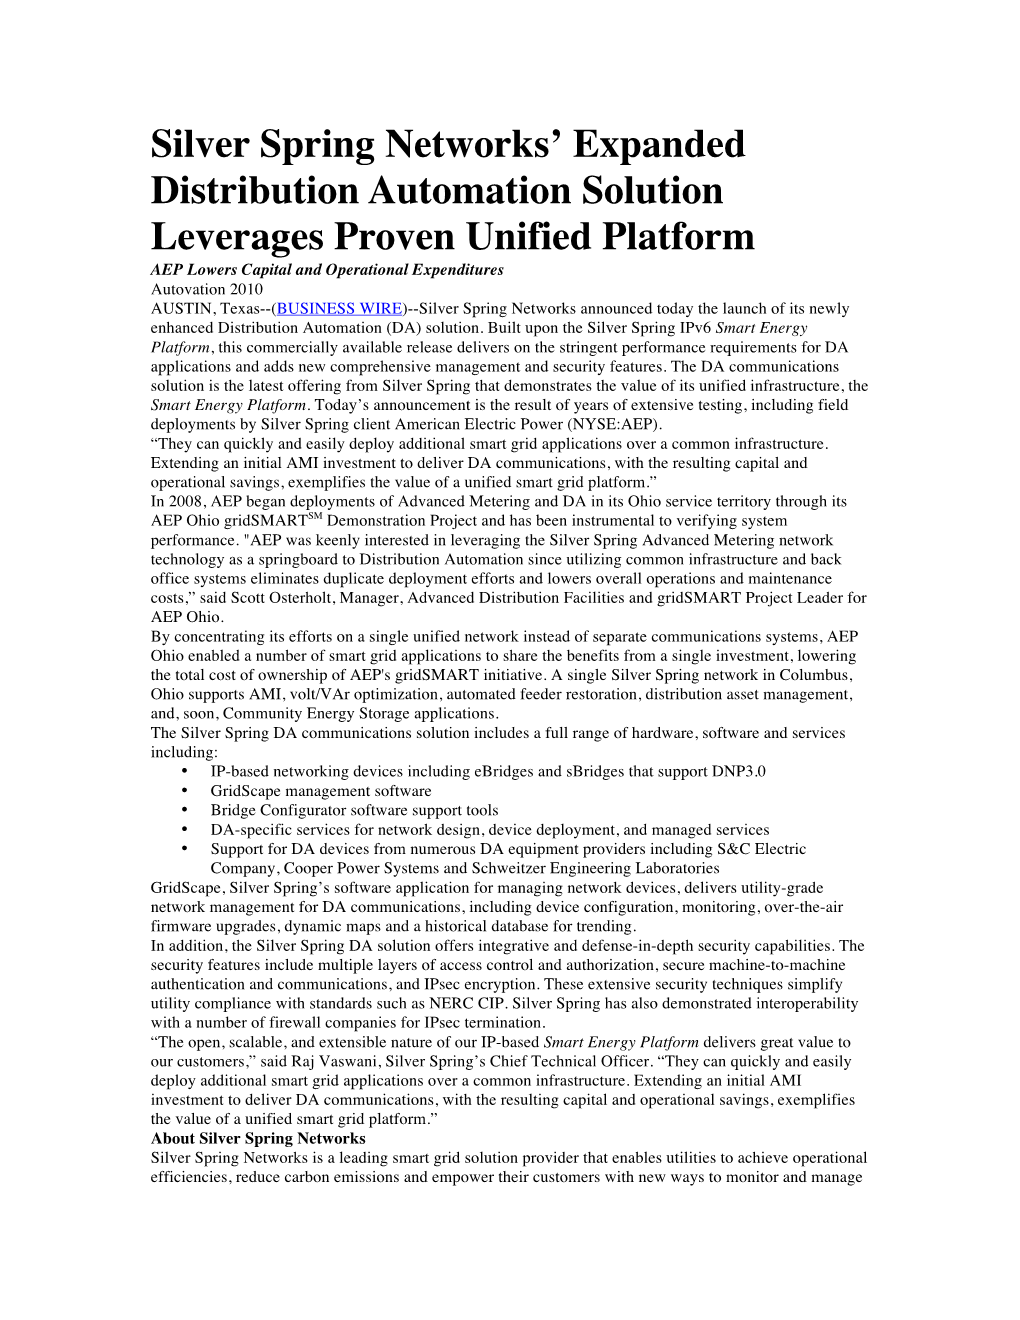 Silver Spring Networks' Expanded Distribution Automation Solution Leverages Proven Unified Platform